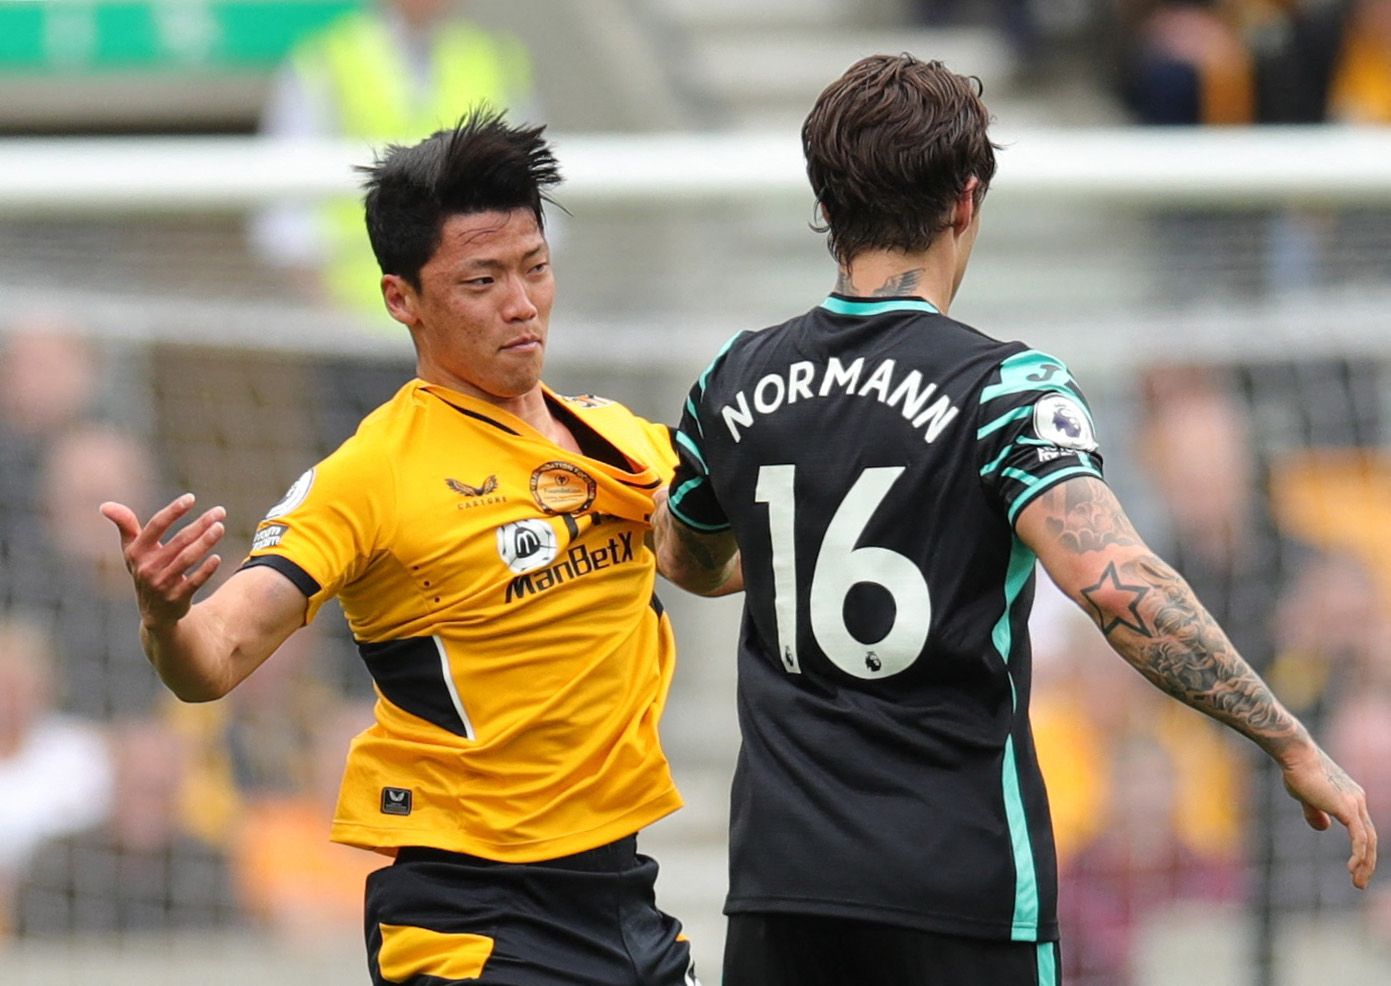 Soccer Football - Premier League - Wolverhampton Wanderers v Norwich City - Molineux Stadium, Wolverhampton, Britain - May 15, 2022 Wolverhampton Wanderers' Hwang Hee-Chan clashes with Norwich City's Mathias Normann REUTERS/Chris Radburn EDITORIAL USE ONLY. No use with unauthorized audio, video, data, fixture lists, club/league logos or 'live' services. Online in-match use limited to 75 images, no video emulation. No use in betting, games or single club /league/player publications.  Please conta